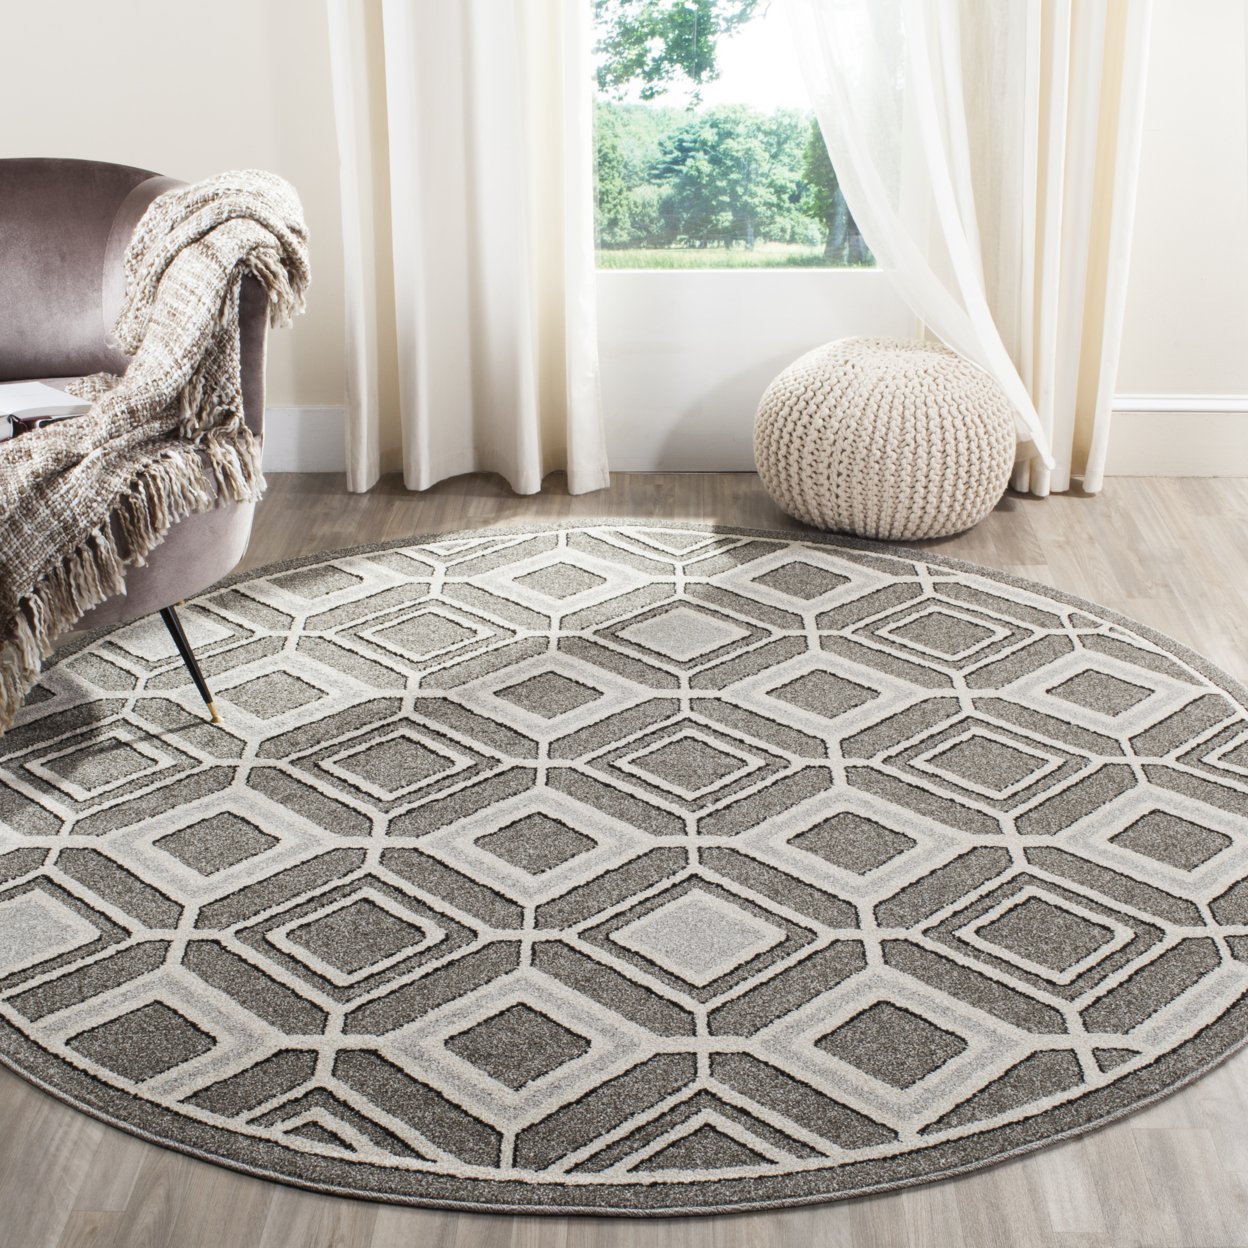 SAFAVIEH Amherst Collection AMT433C Grey / Light Grey Rug - 7' Square